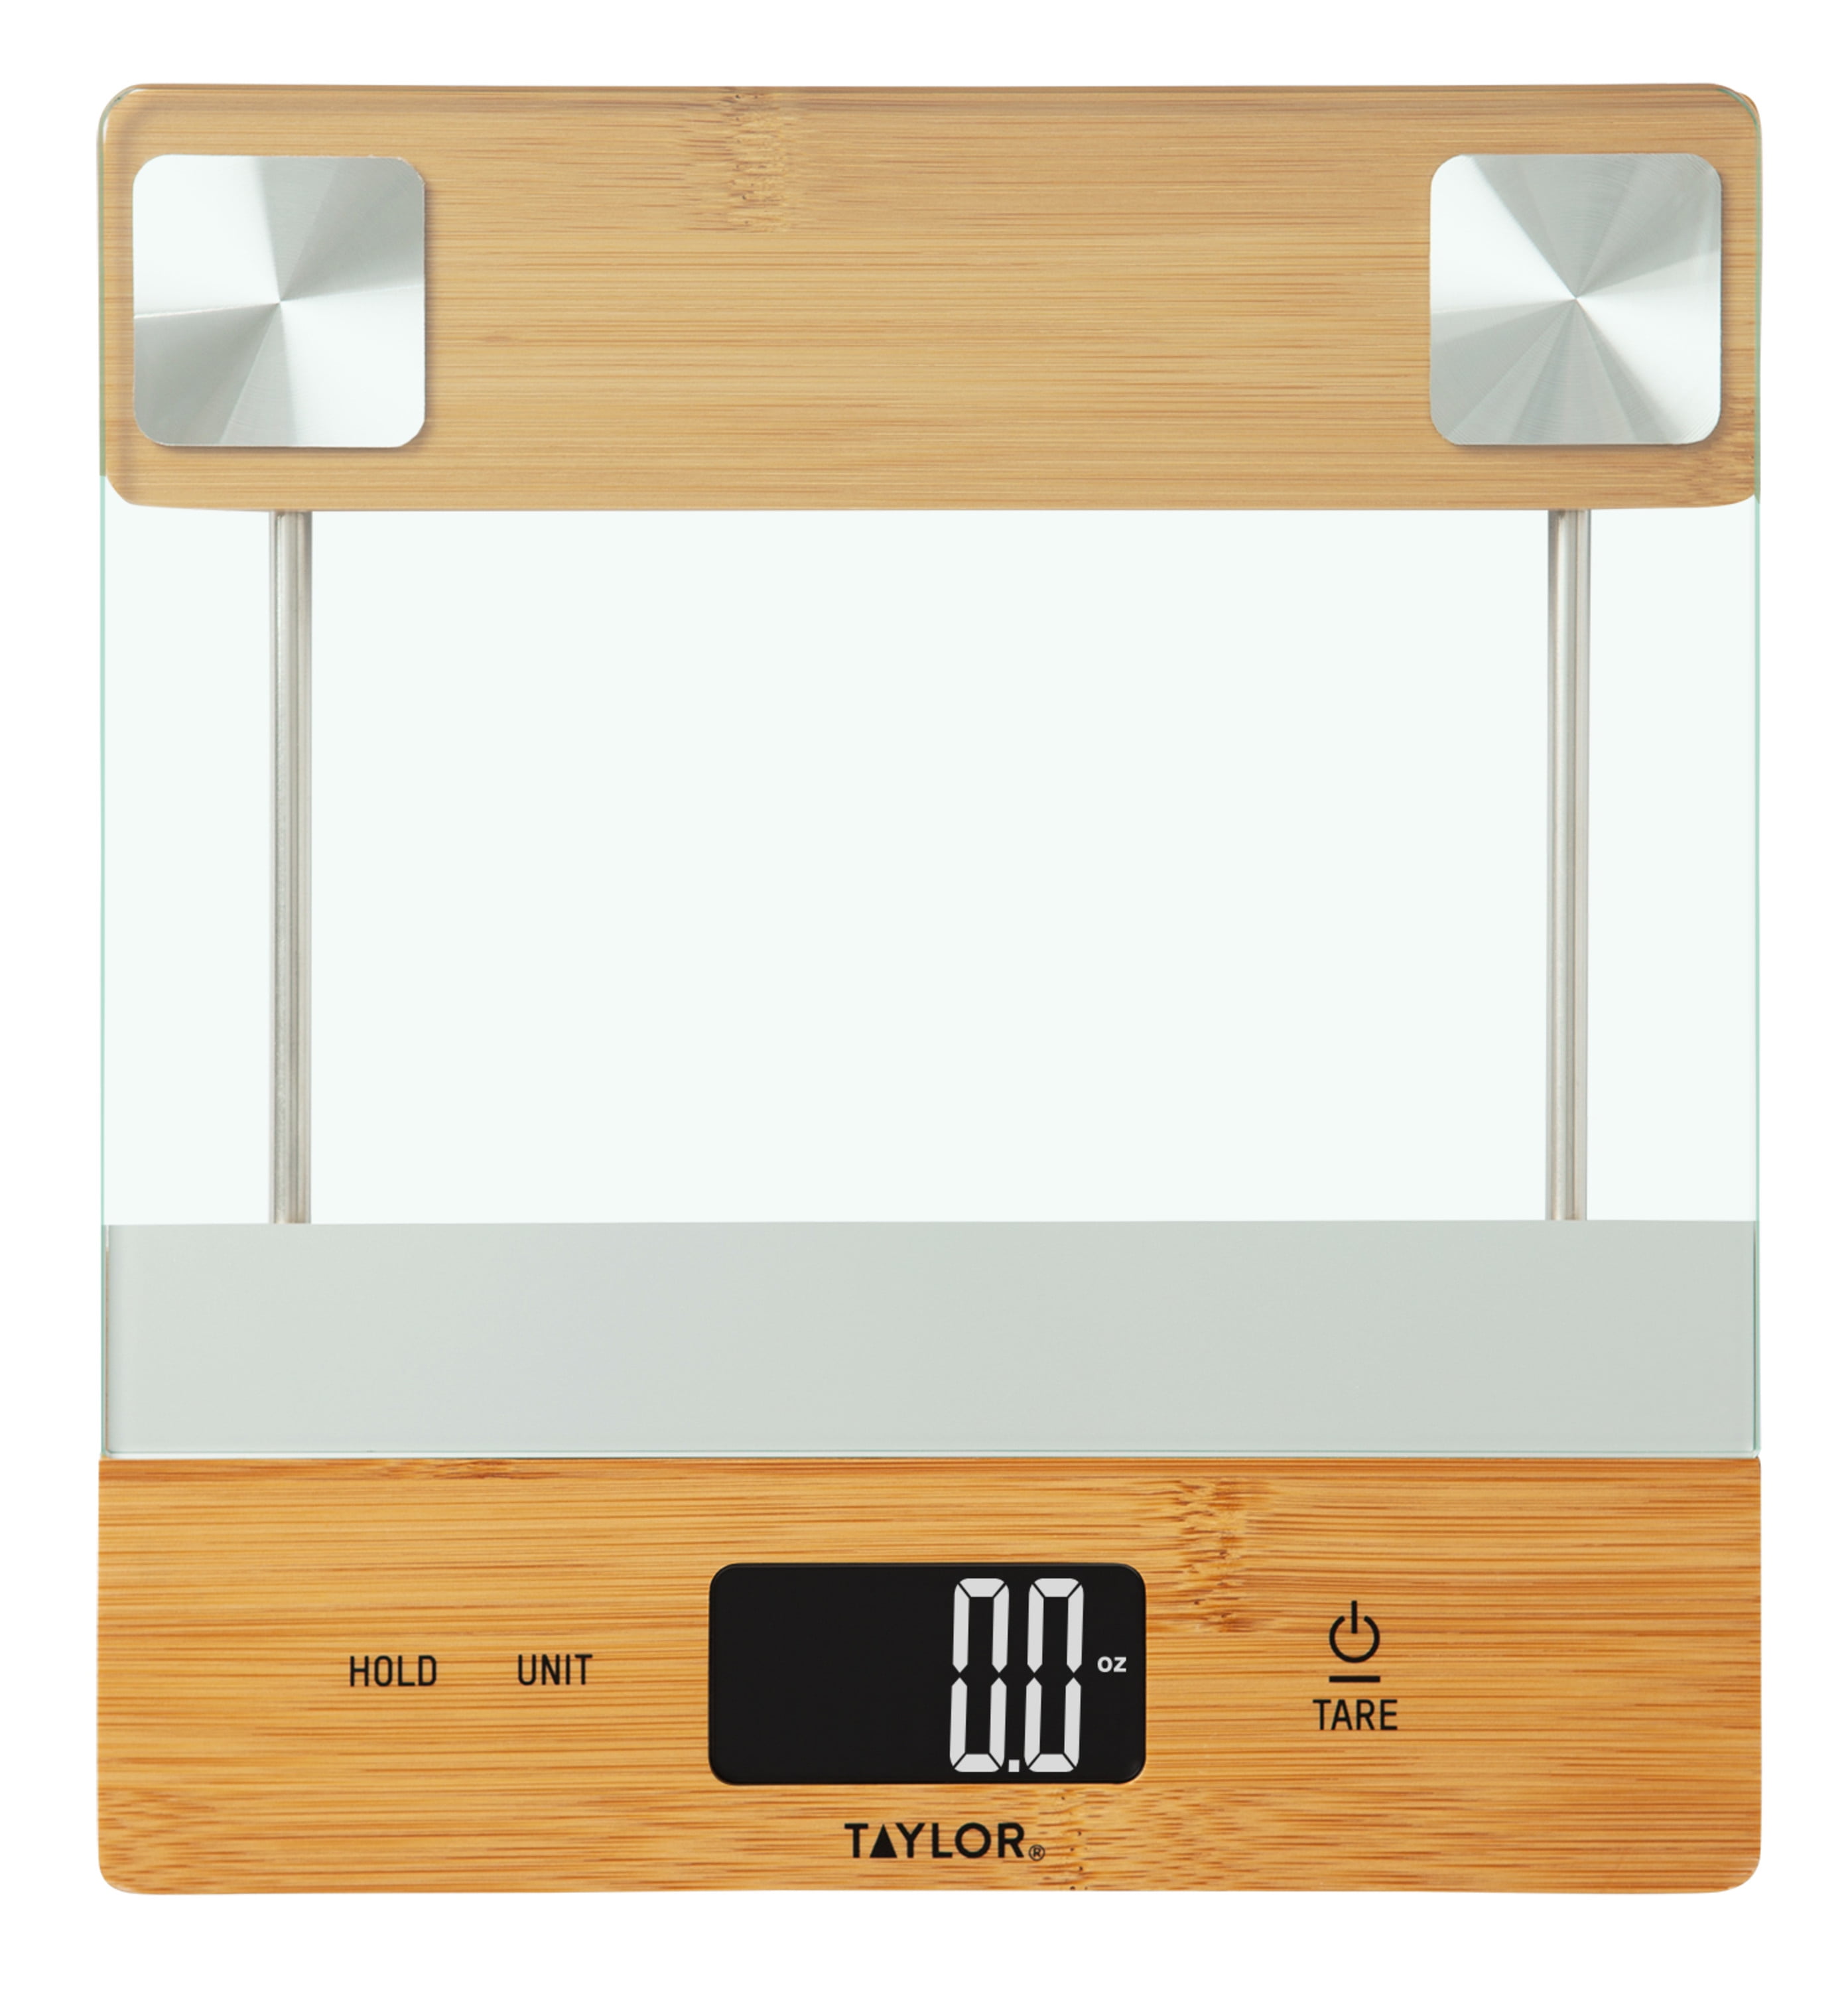 TAYLOR Bamboo Kitchen Scale Eco Friendly 11lb Capacity NEW 3828 